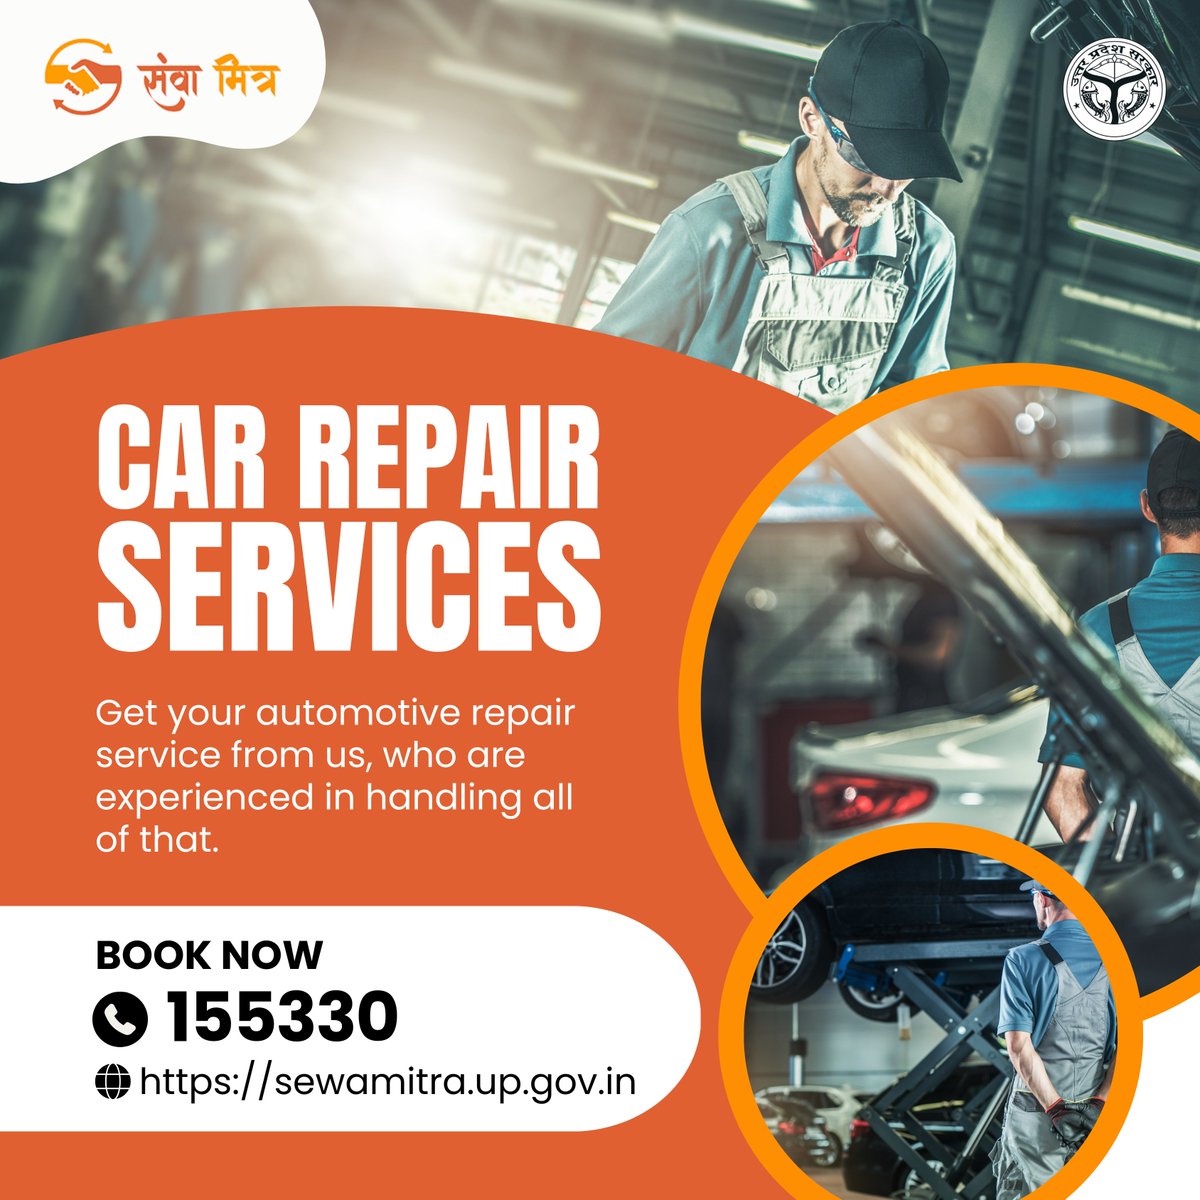 Call Now At 155330 For Hassle Free Car Repair & Services.

#carservices #carservice #carservicecentre #carserviceexperts #carrepair #carrepairs #carrepairing #carrepairtips #carrepairtools #carrepairnearme #carrepairservice #sewamitra #sewamitraapp #sewamitrajobs #sewamitraindia